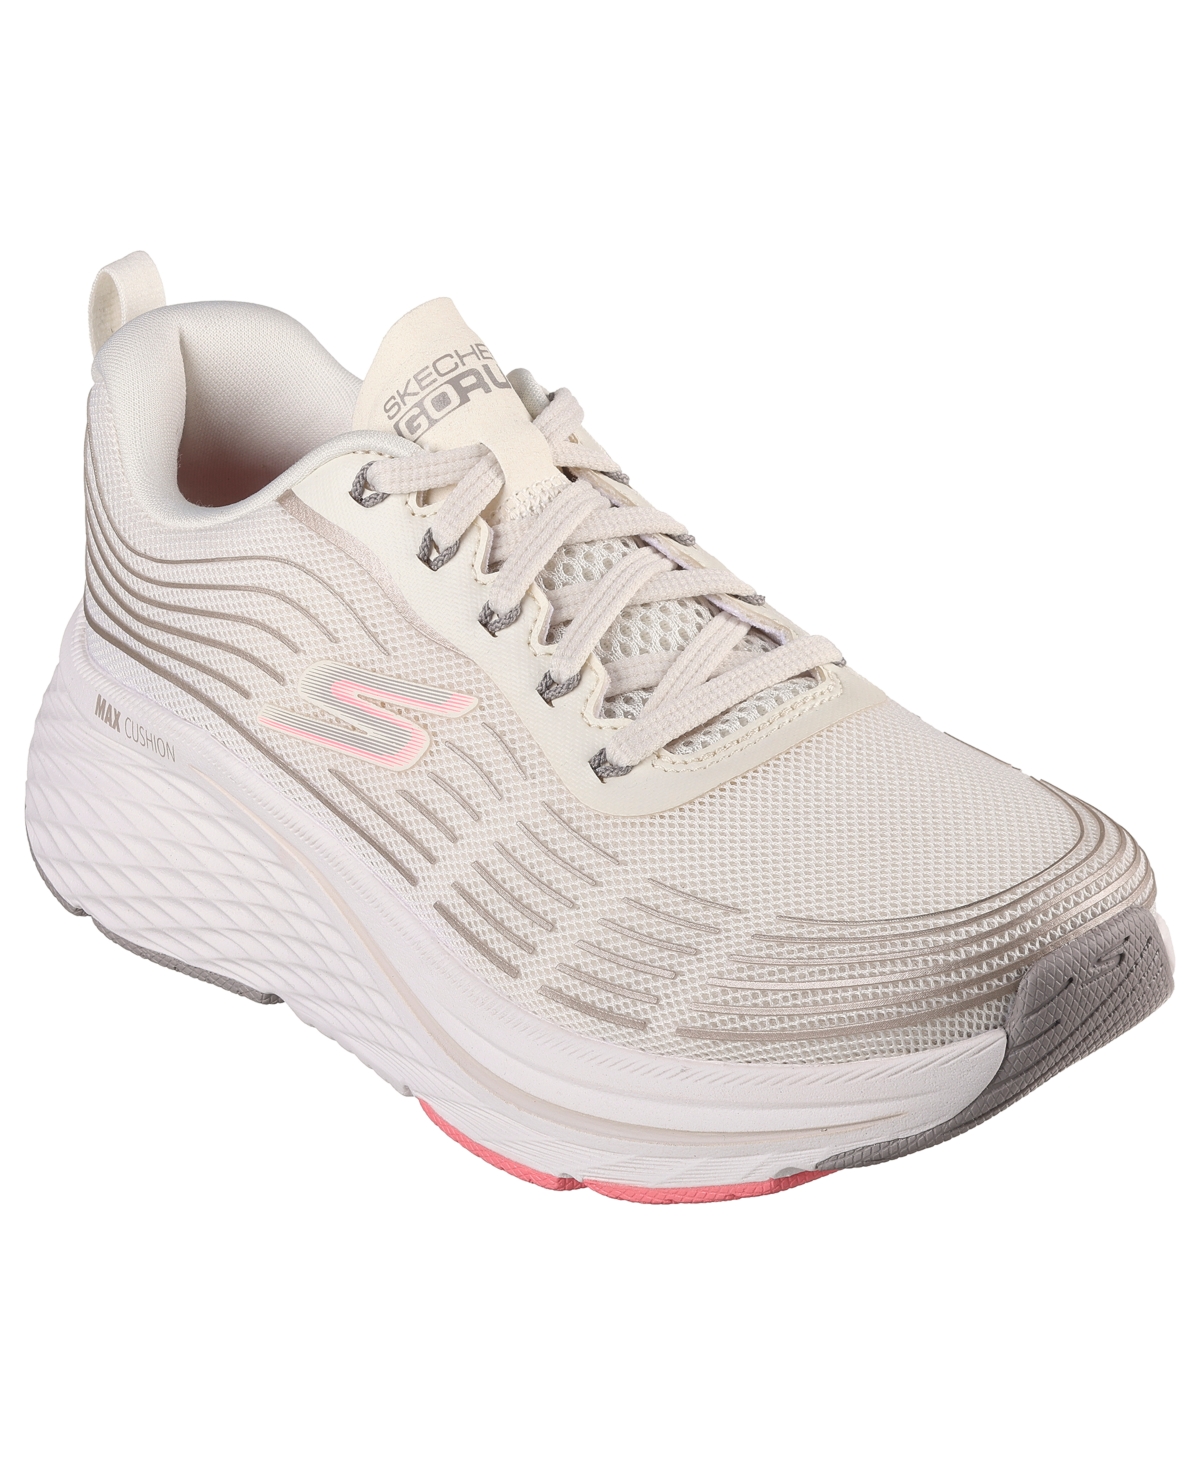 Women's Max Cushioning Elite 2.0 Athletic Running Sneakers from Finish Line - Natural, Pink